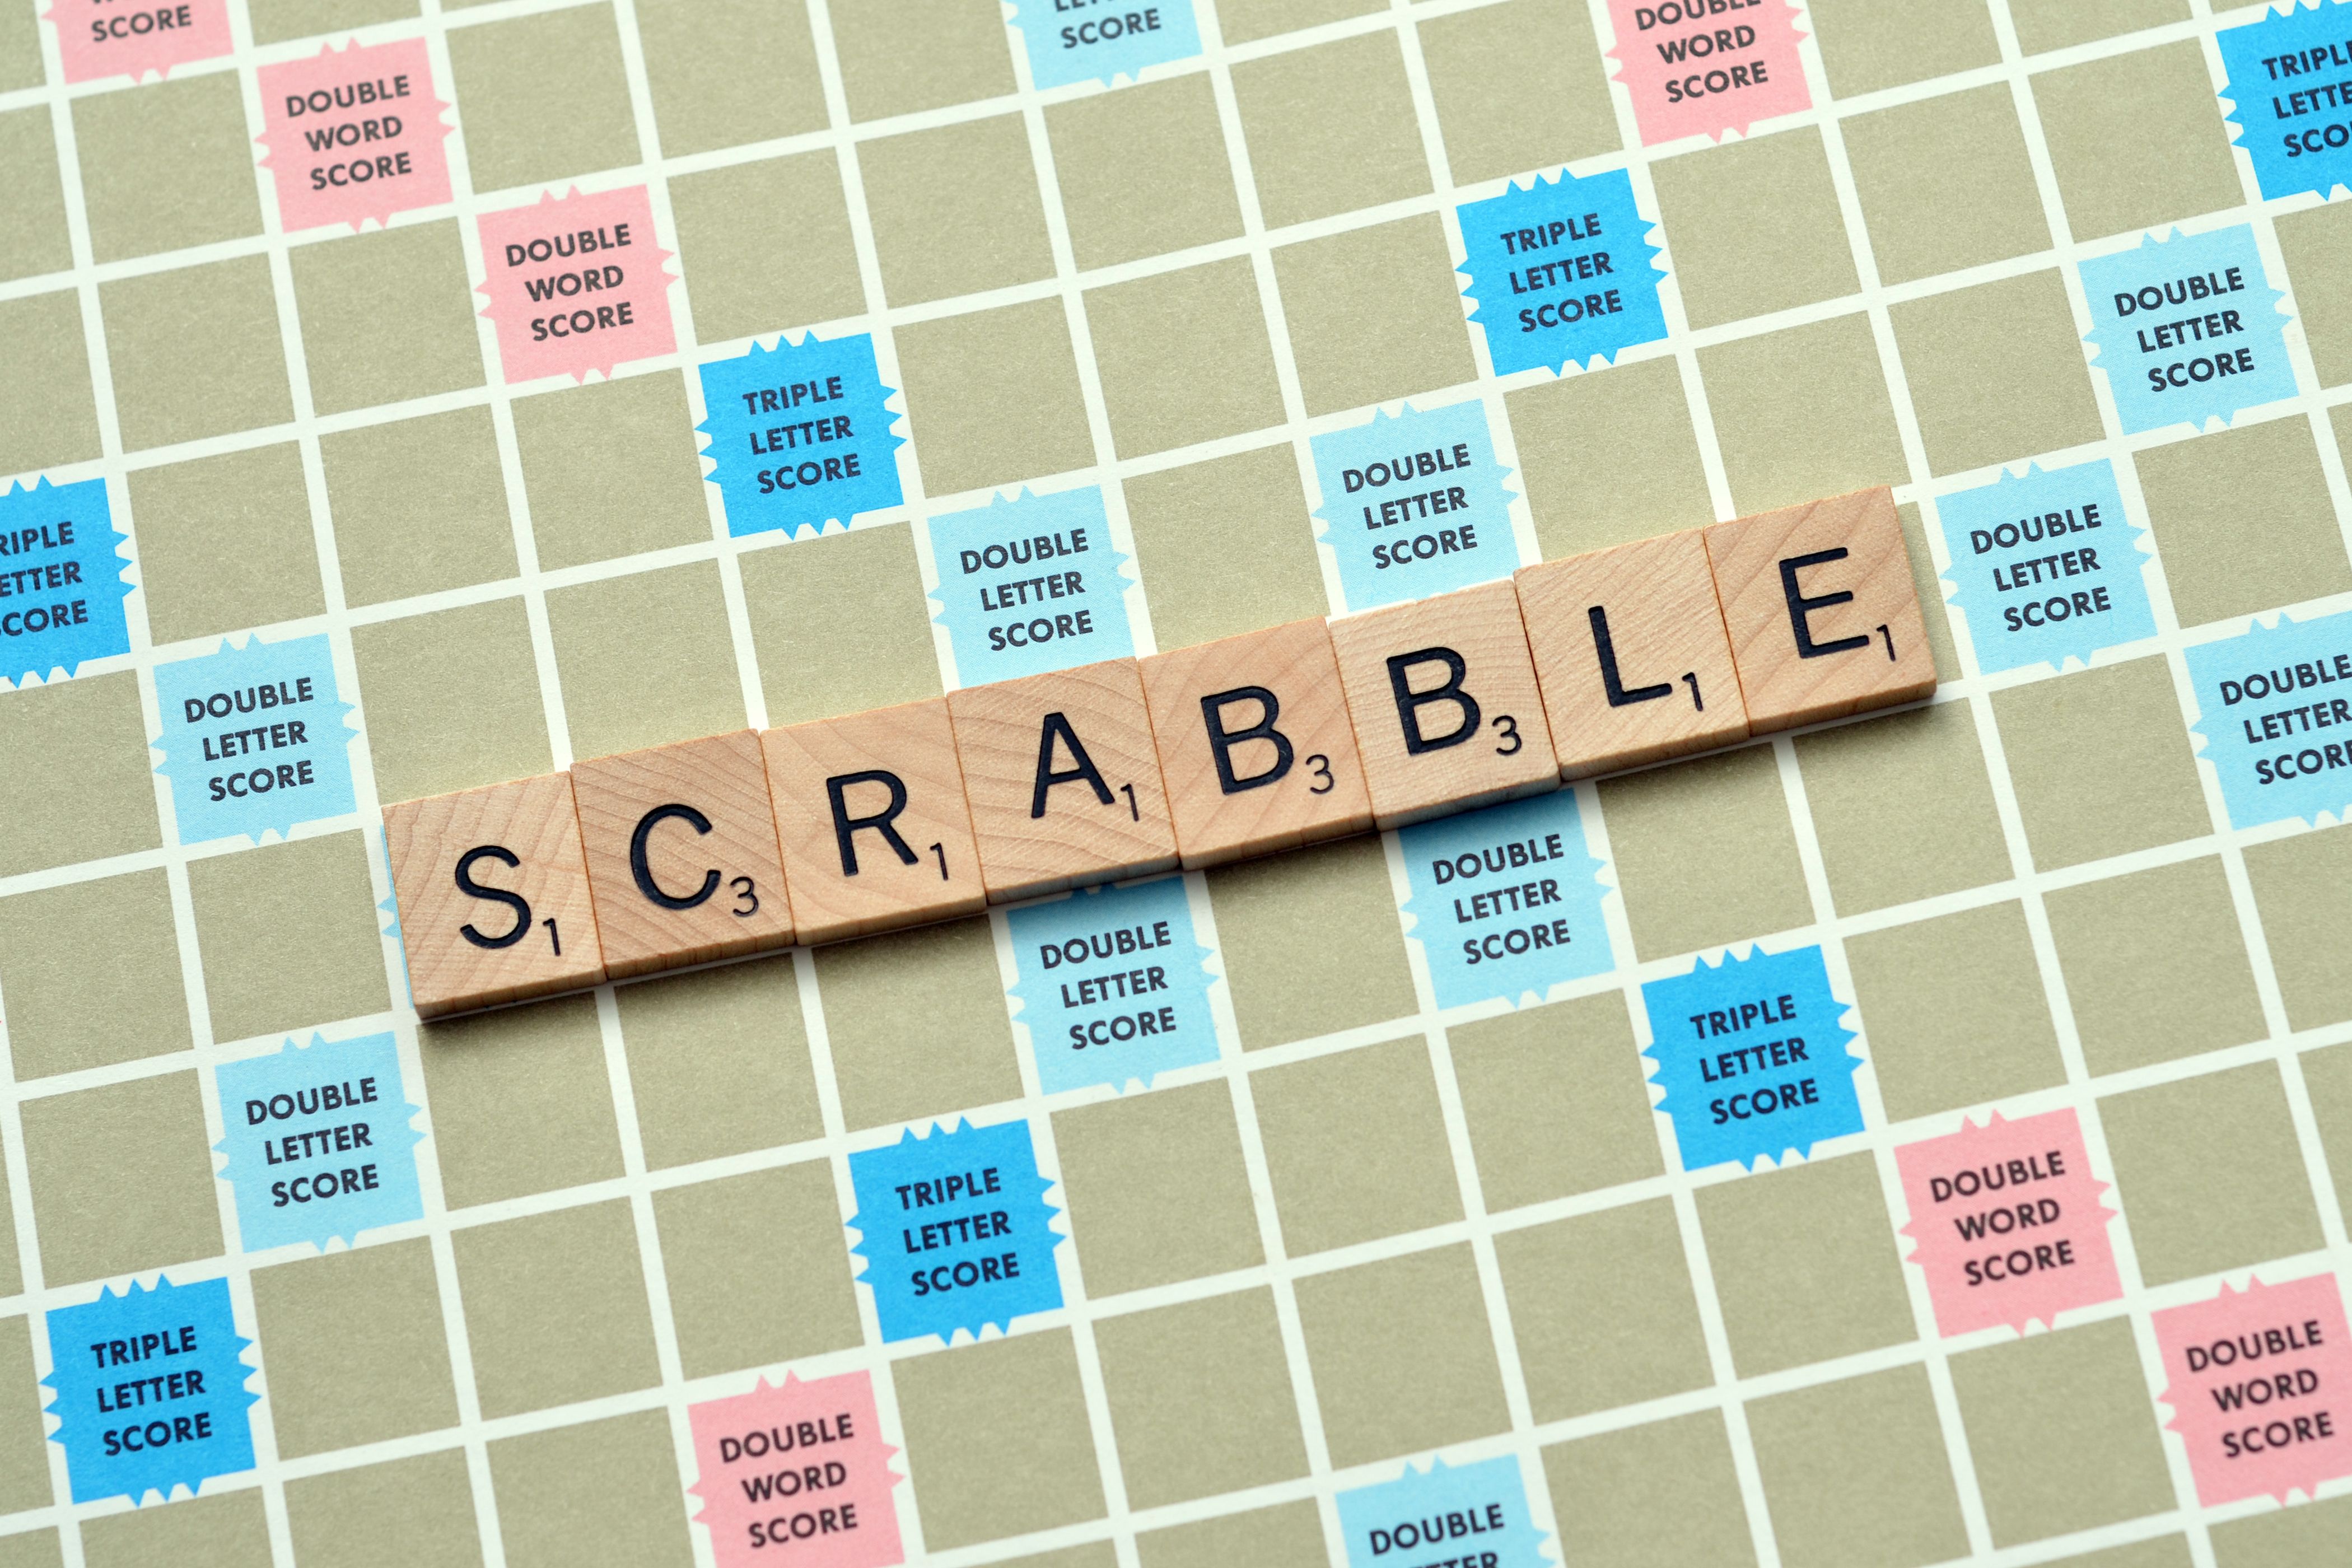 play scrabble against a computer